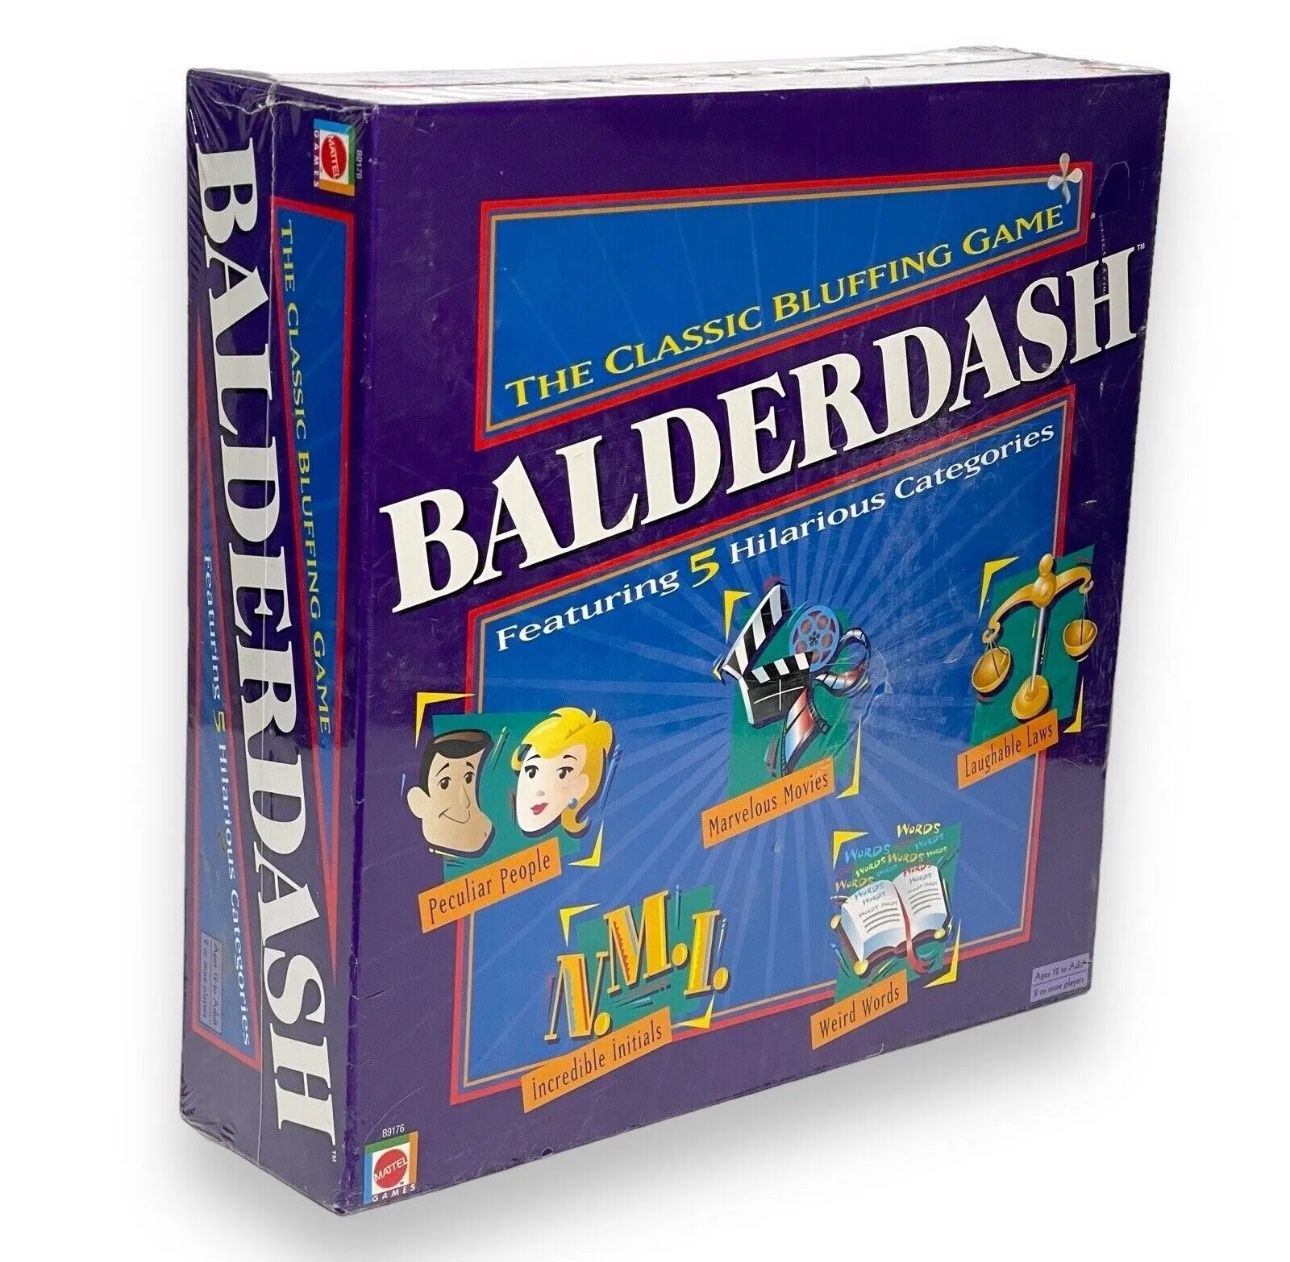 BALDERDASH The Classic Bluffing Board Game 2003 Vintage NEW Sealed